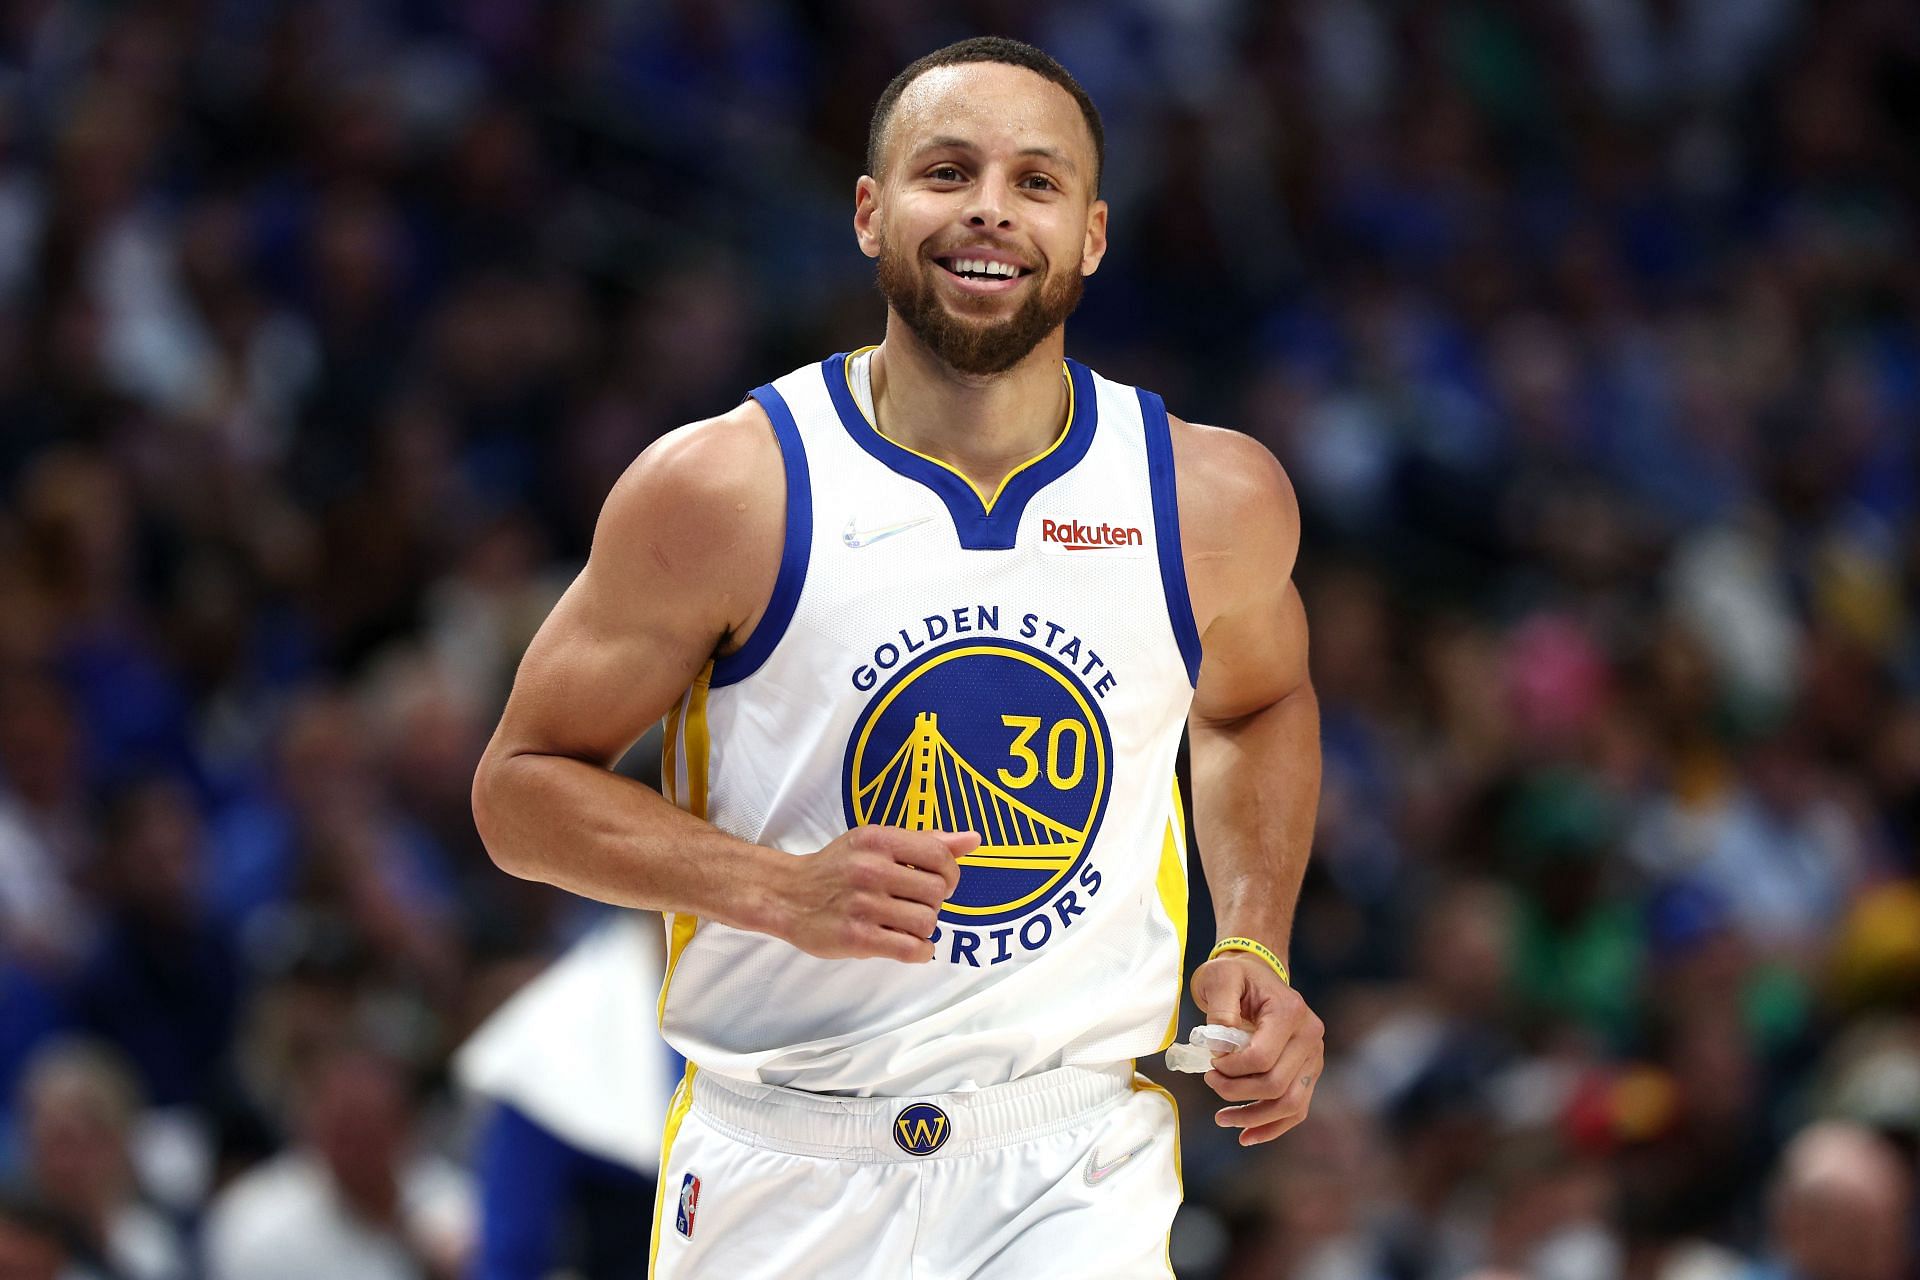 Steph Curry may be done with basketball as he teases a new sporting path,  following in his sister Sydel Curry's footsteps